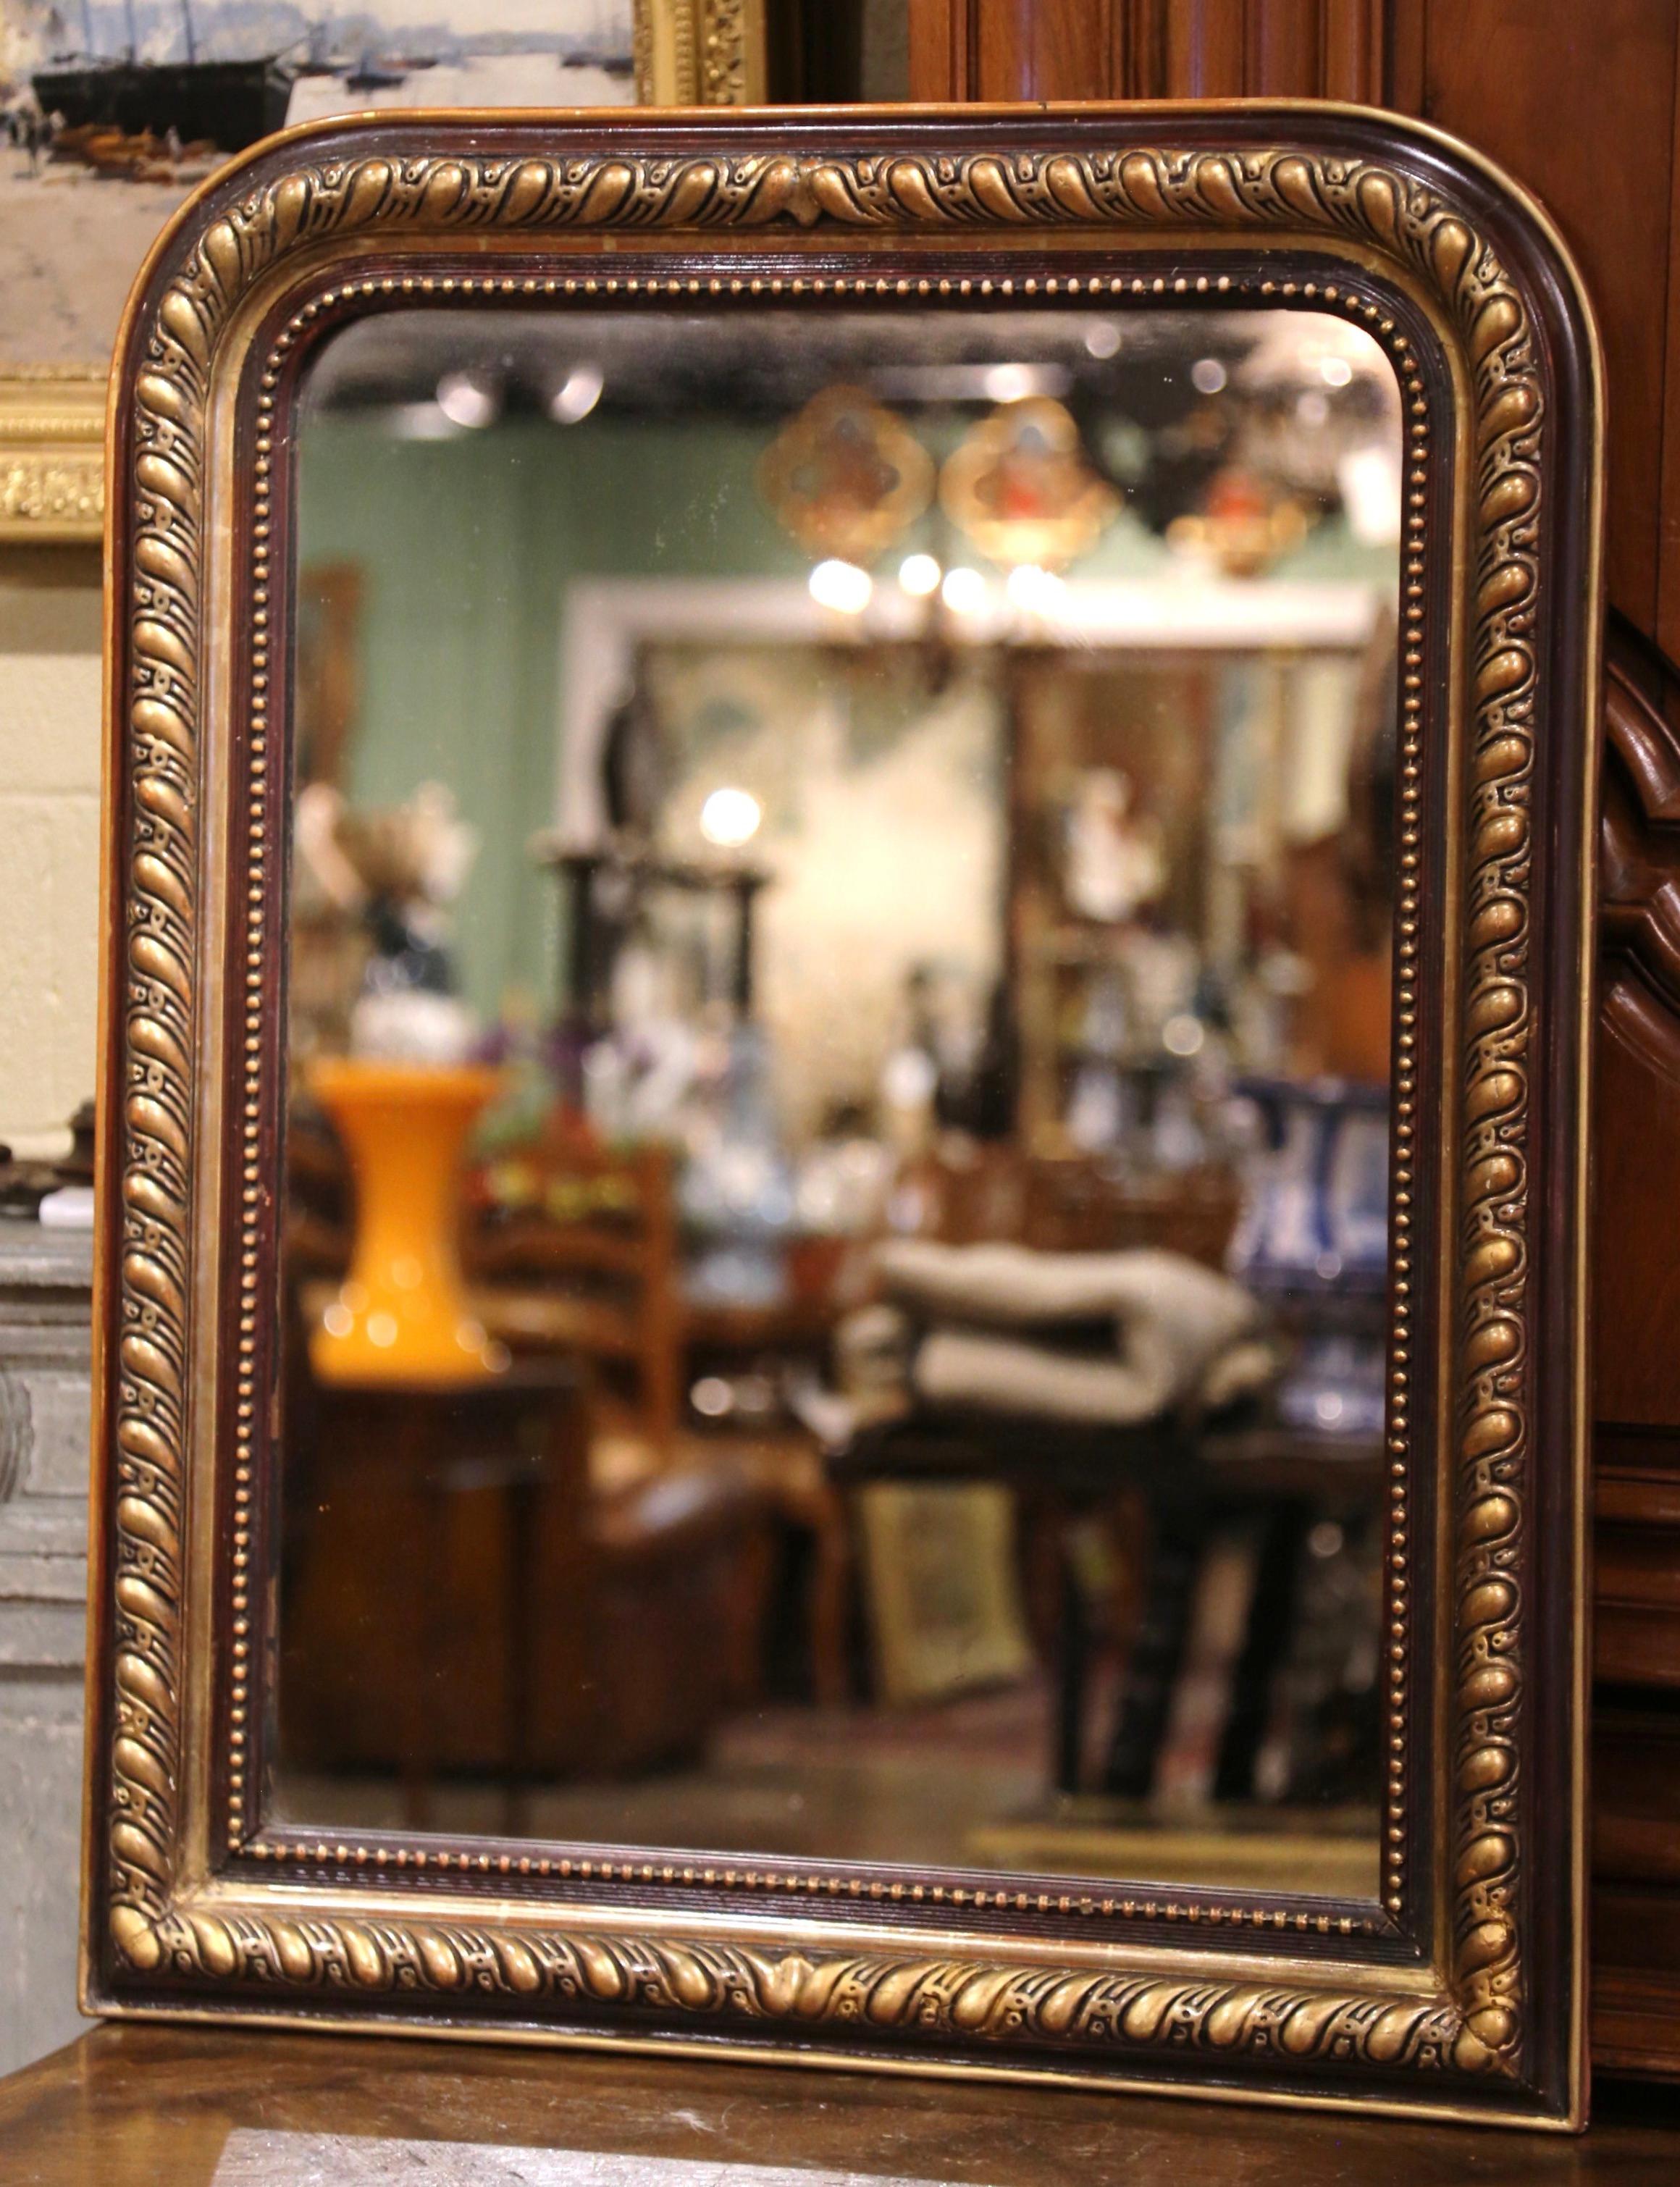 This elegant antique wall mirror was crafted in France, circa 1870. The two-tone frame is decorated with carved scroll motifs in high relief between patinated brown paint finish; the frame is further embellished with bead decor around the perimeter.